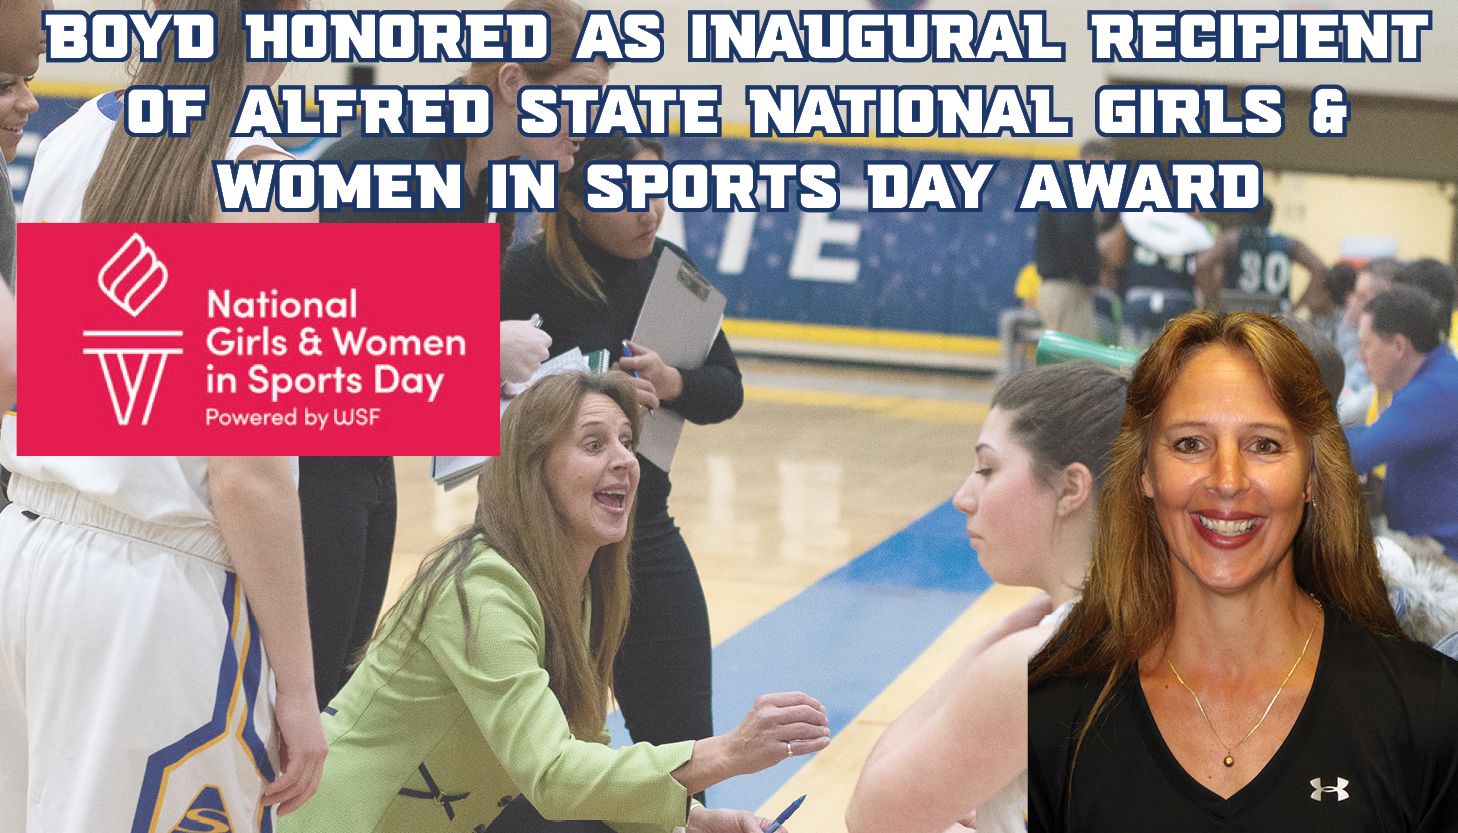 Gina Boyd, head women's basketball coach, pictured talking to her team was the recipient of the ASC National Girls & Women in Sports Day Award